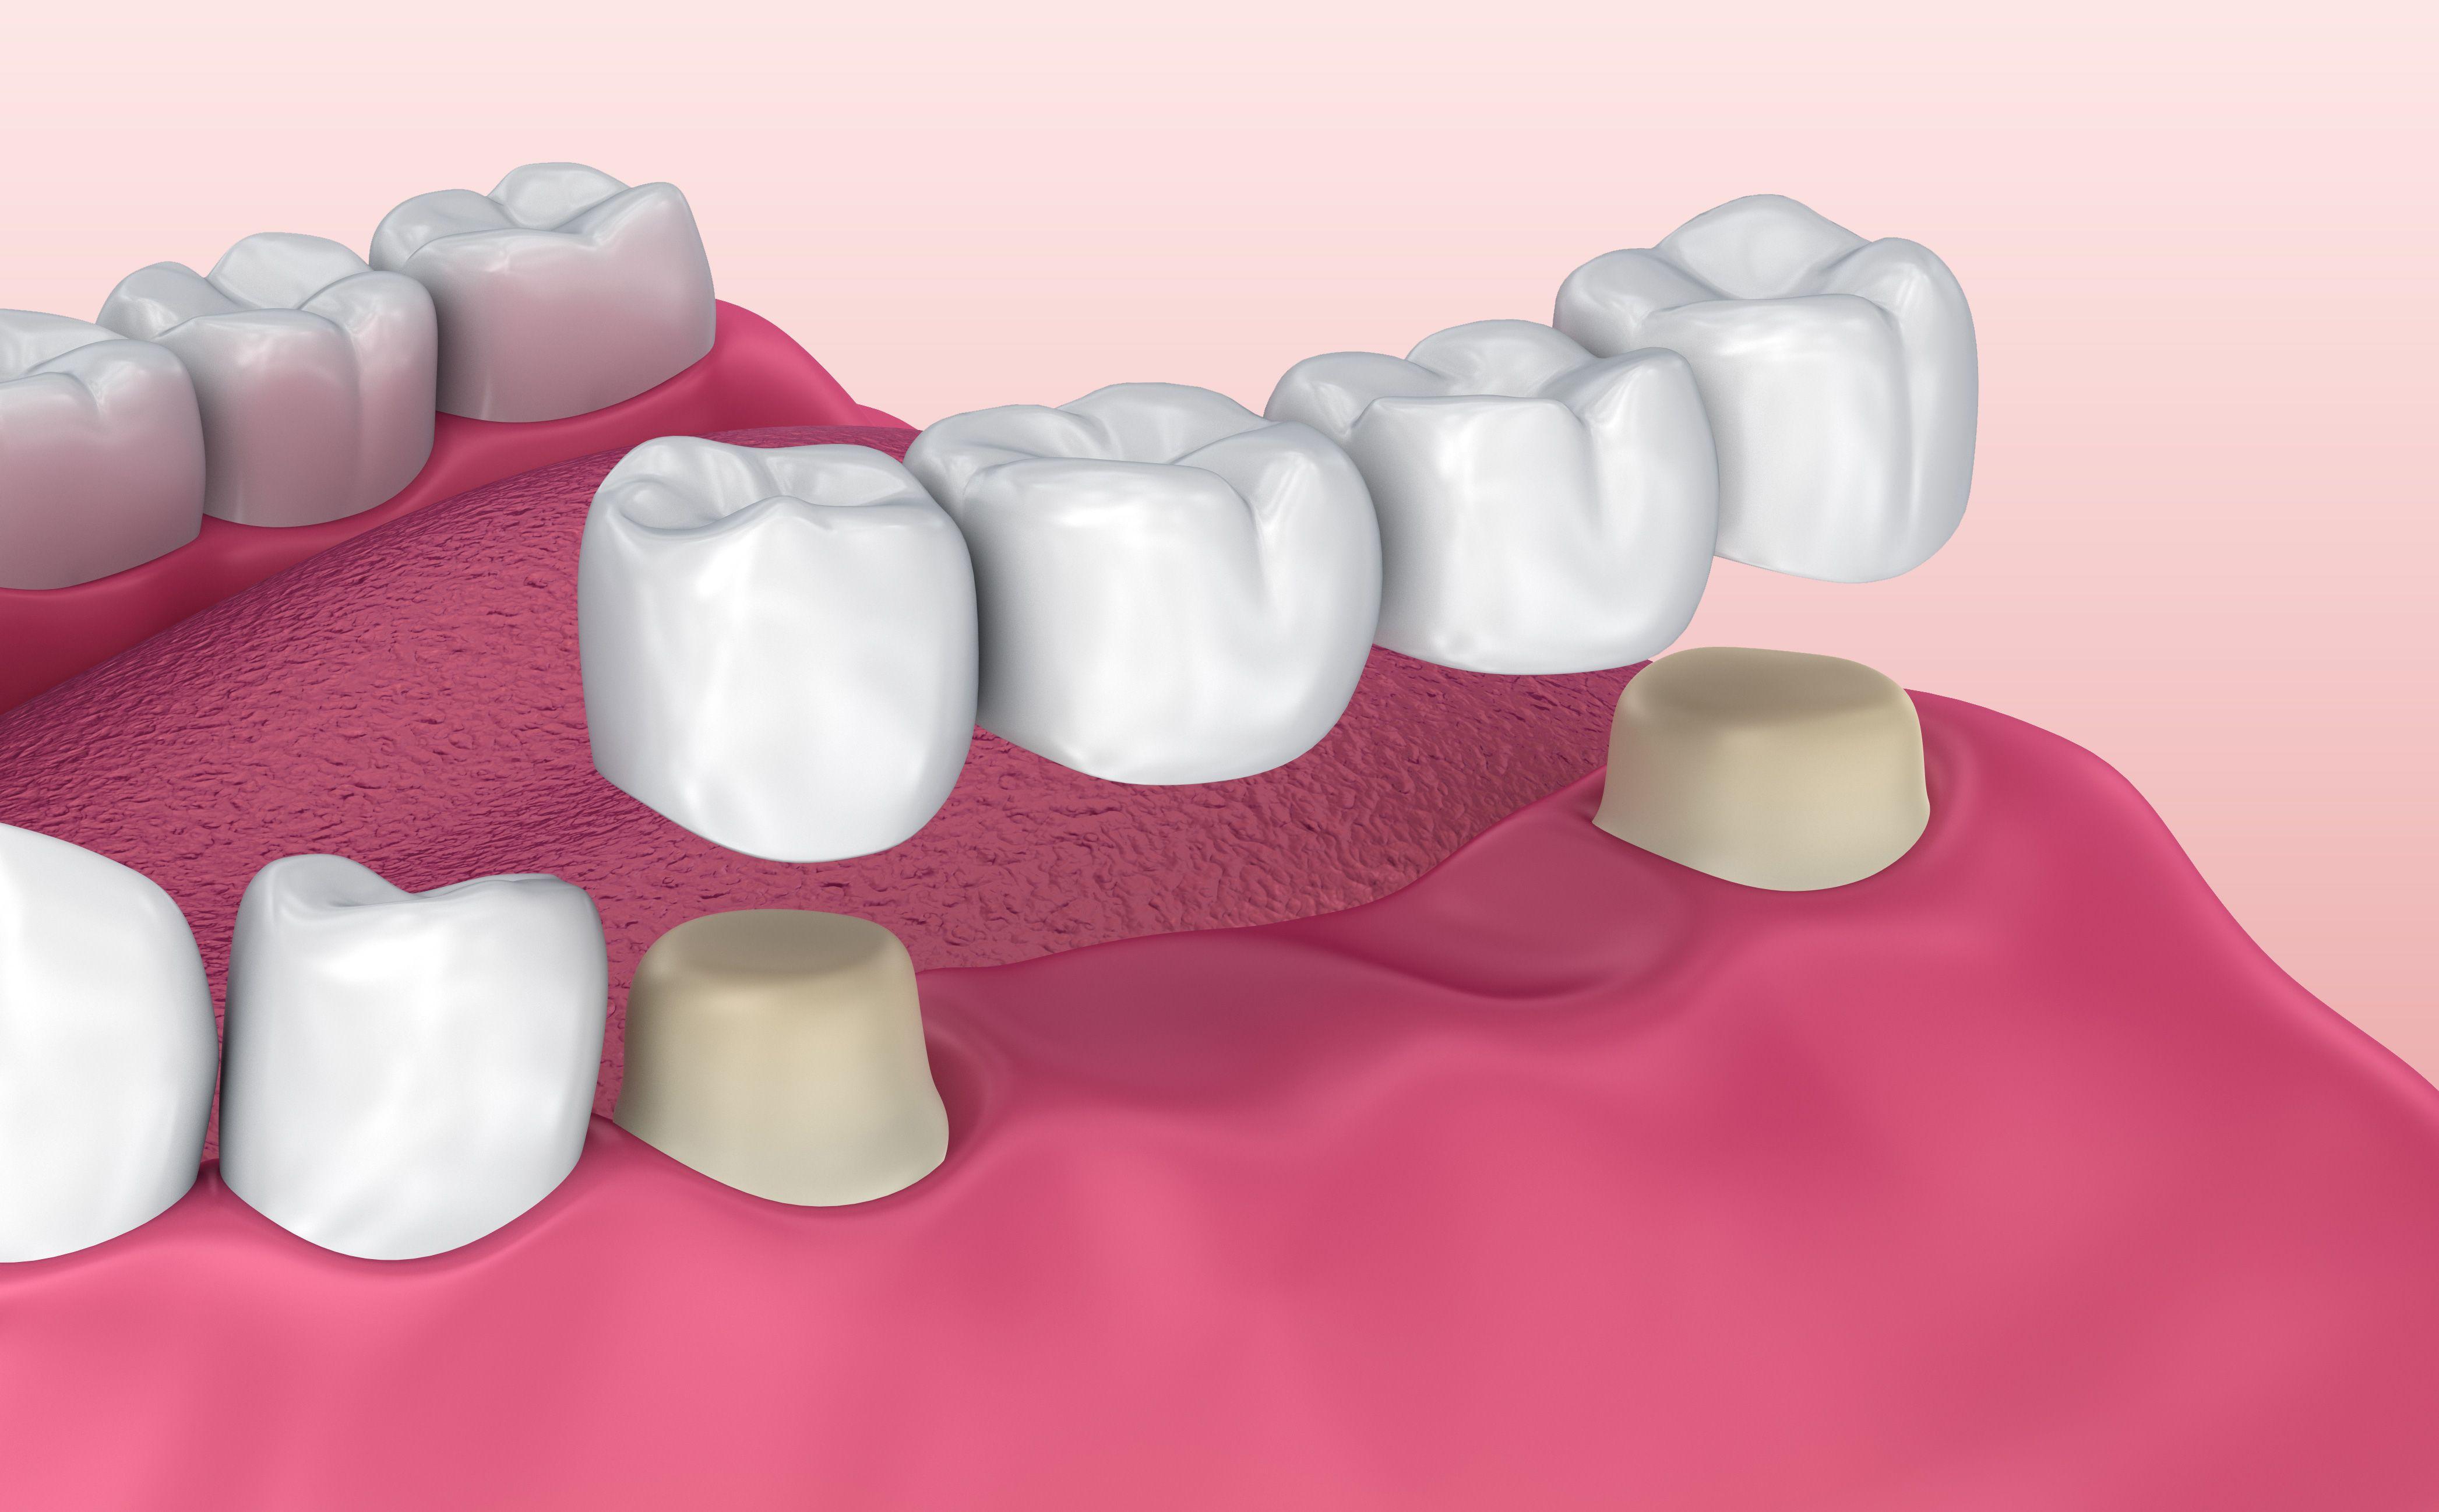 What Are The Three Main Types Of Dental Bridges?